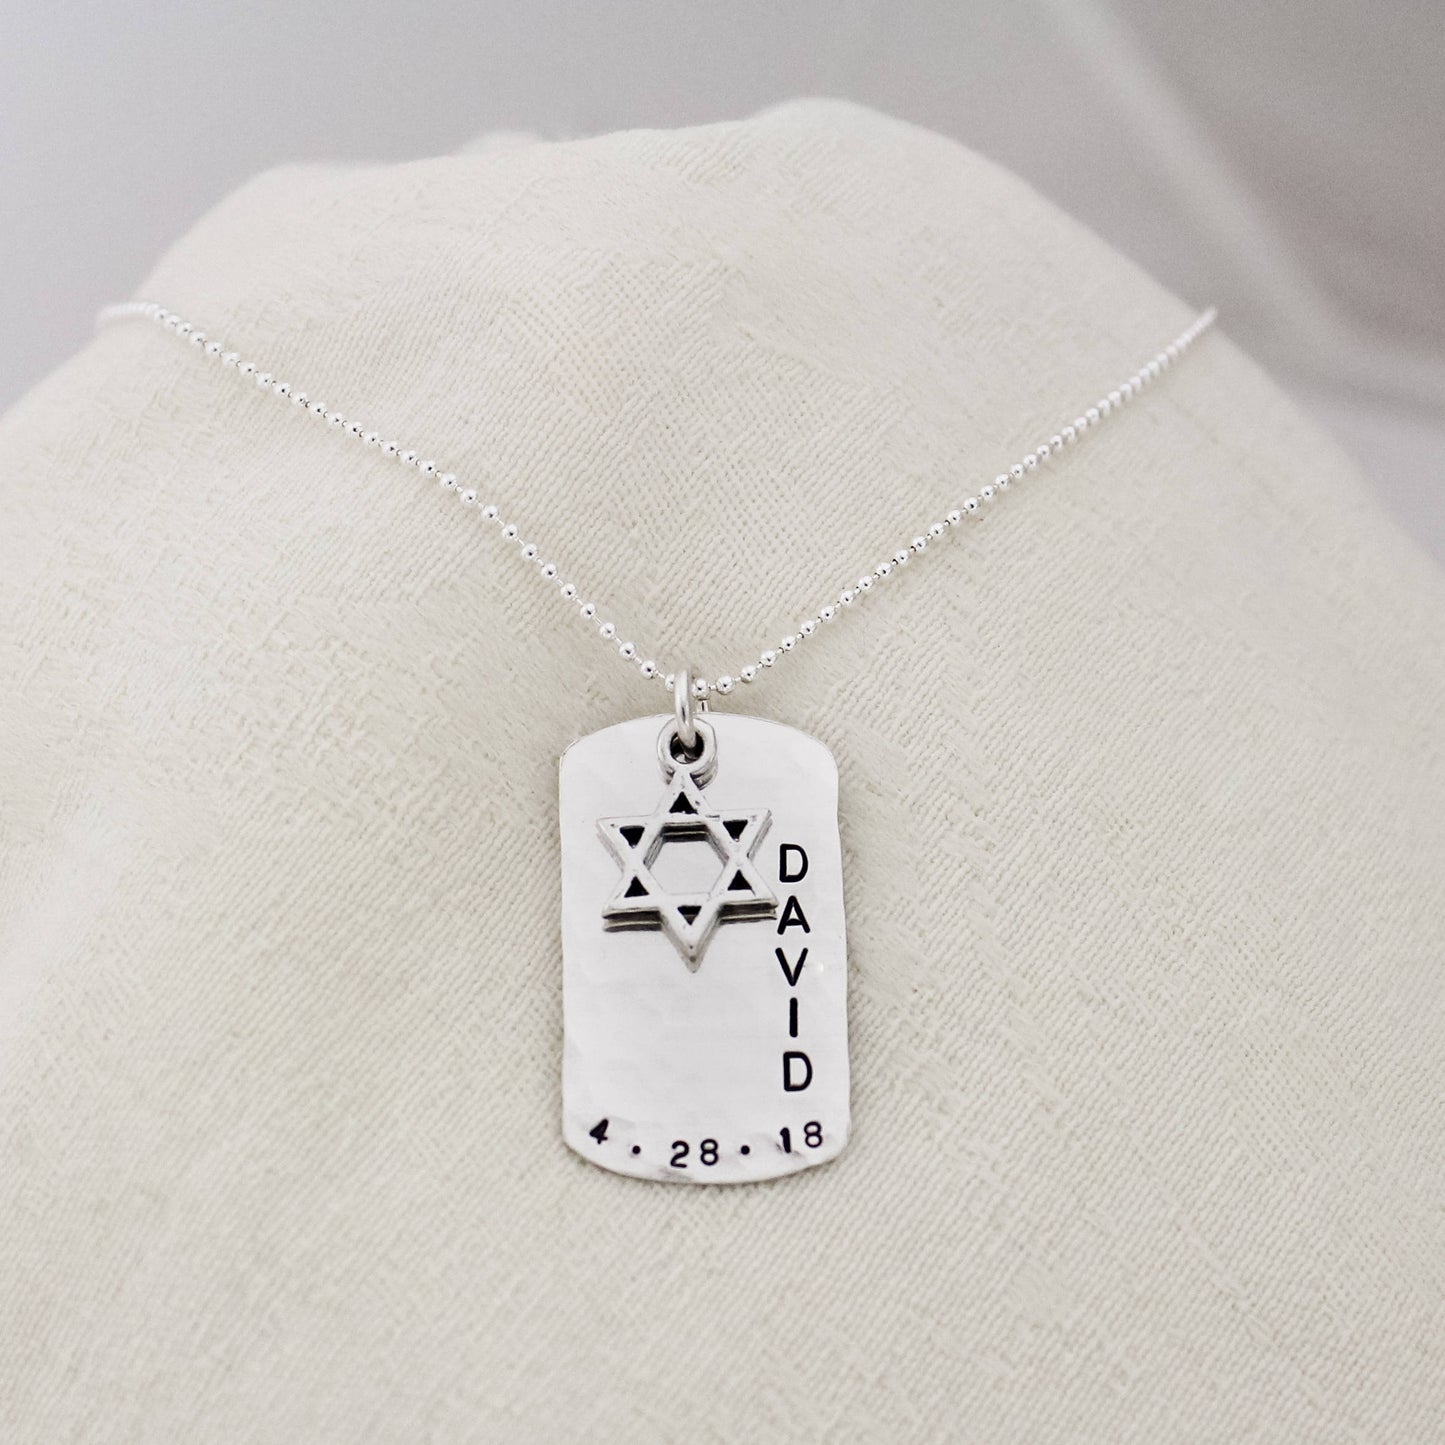 Personalized Boys Bar Mitzvah Necklace Sterling Silver, Personalized Star of David Necklace, Custom Bar Mitzvah Dog Tag Charm, Hand Stamped